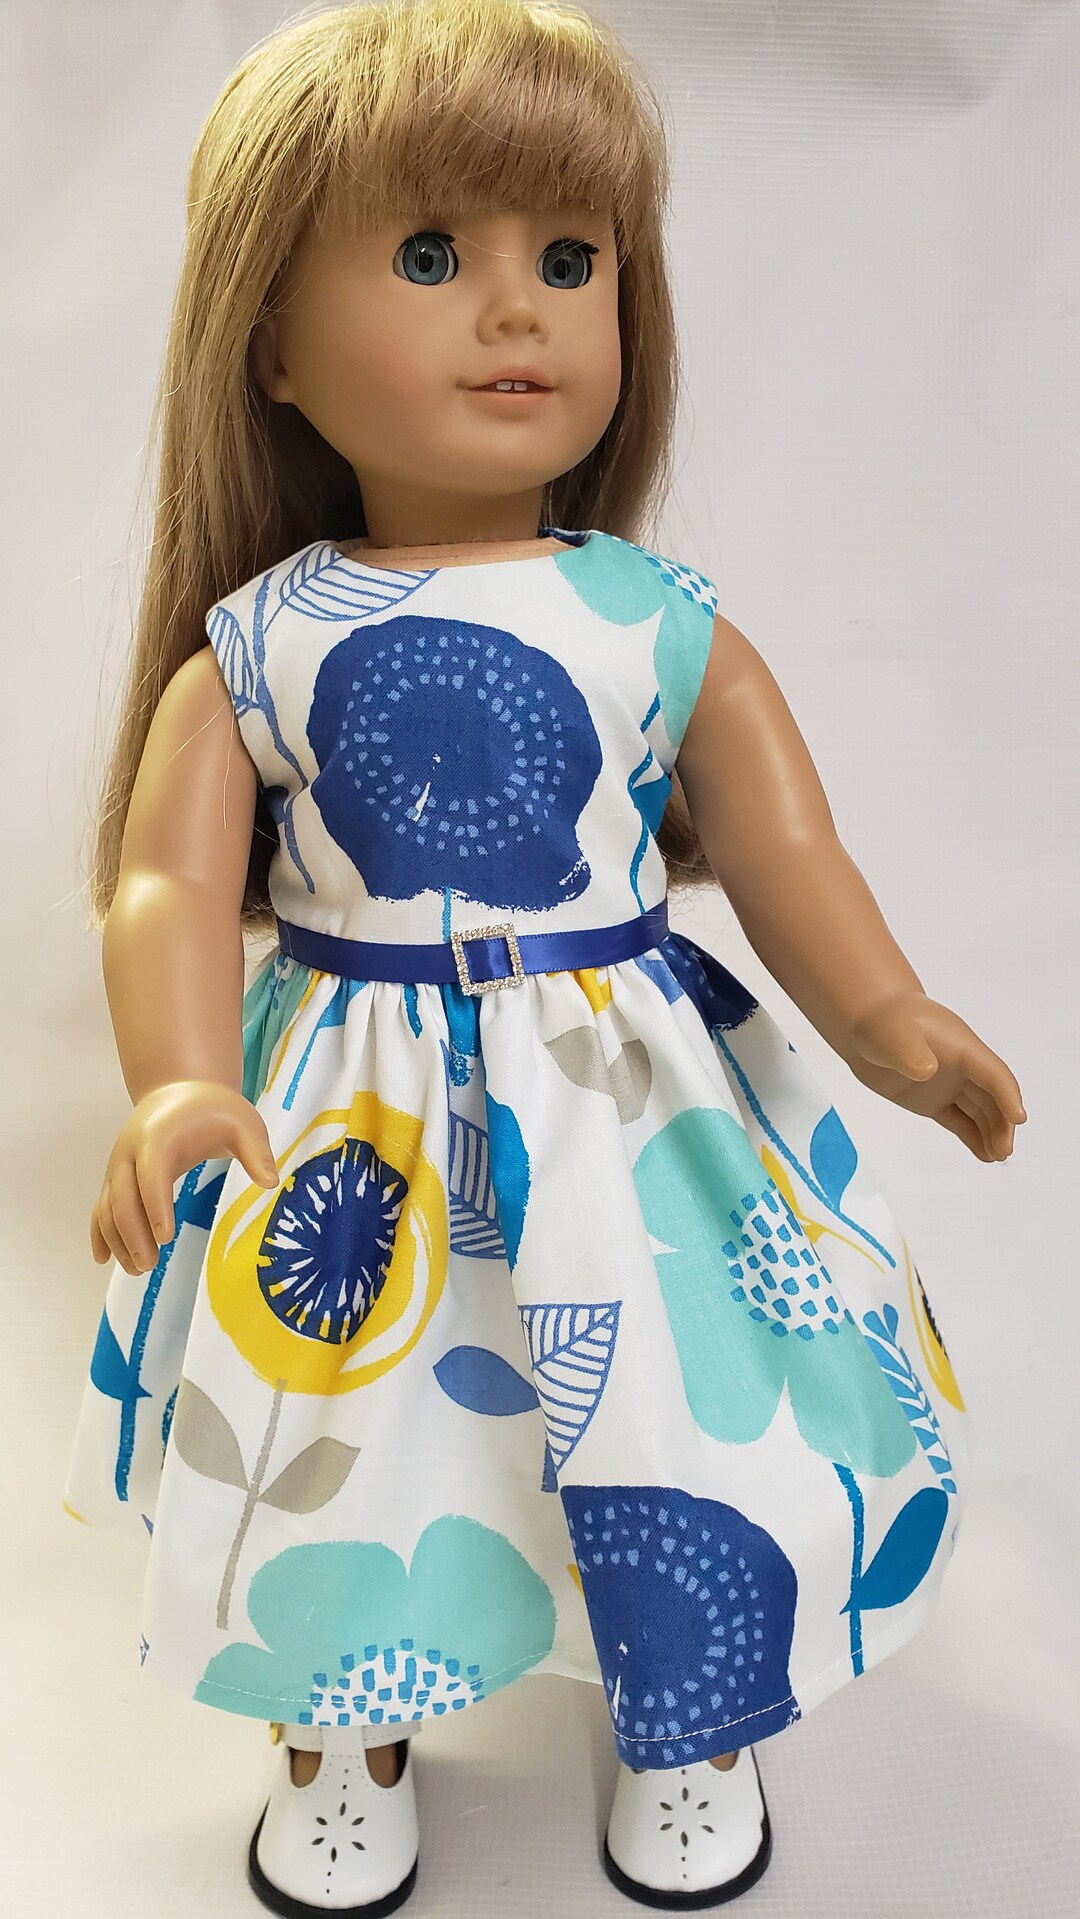 Doll Flower Dress 18 Inch Doll Dress Made to Fit All Dolls 18 - Etsy